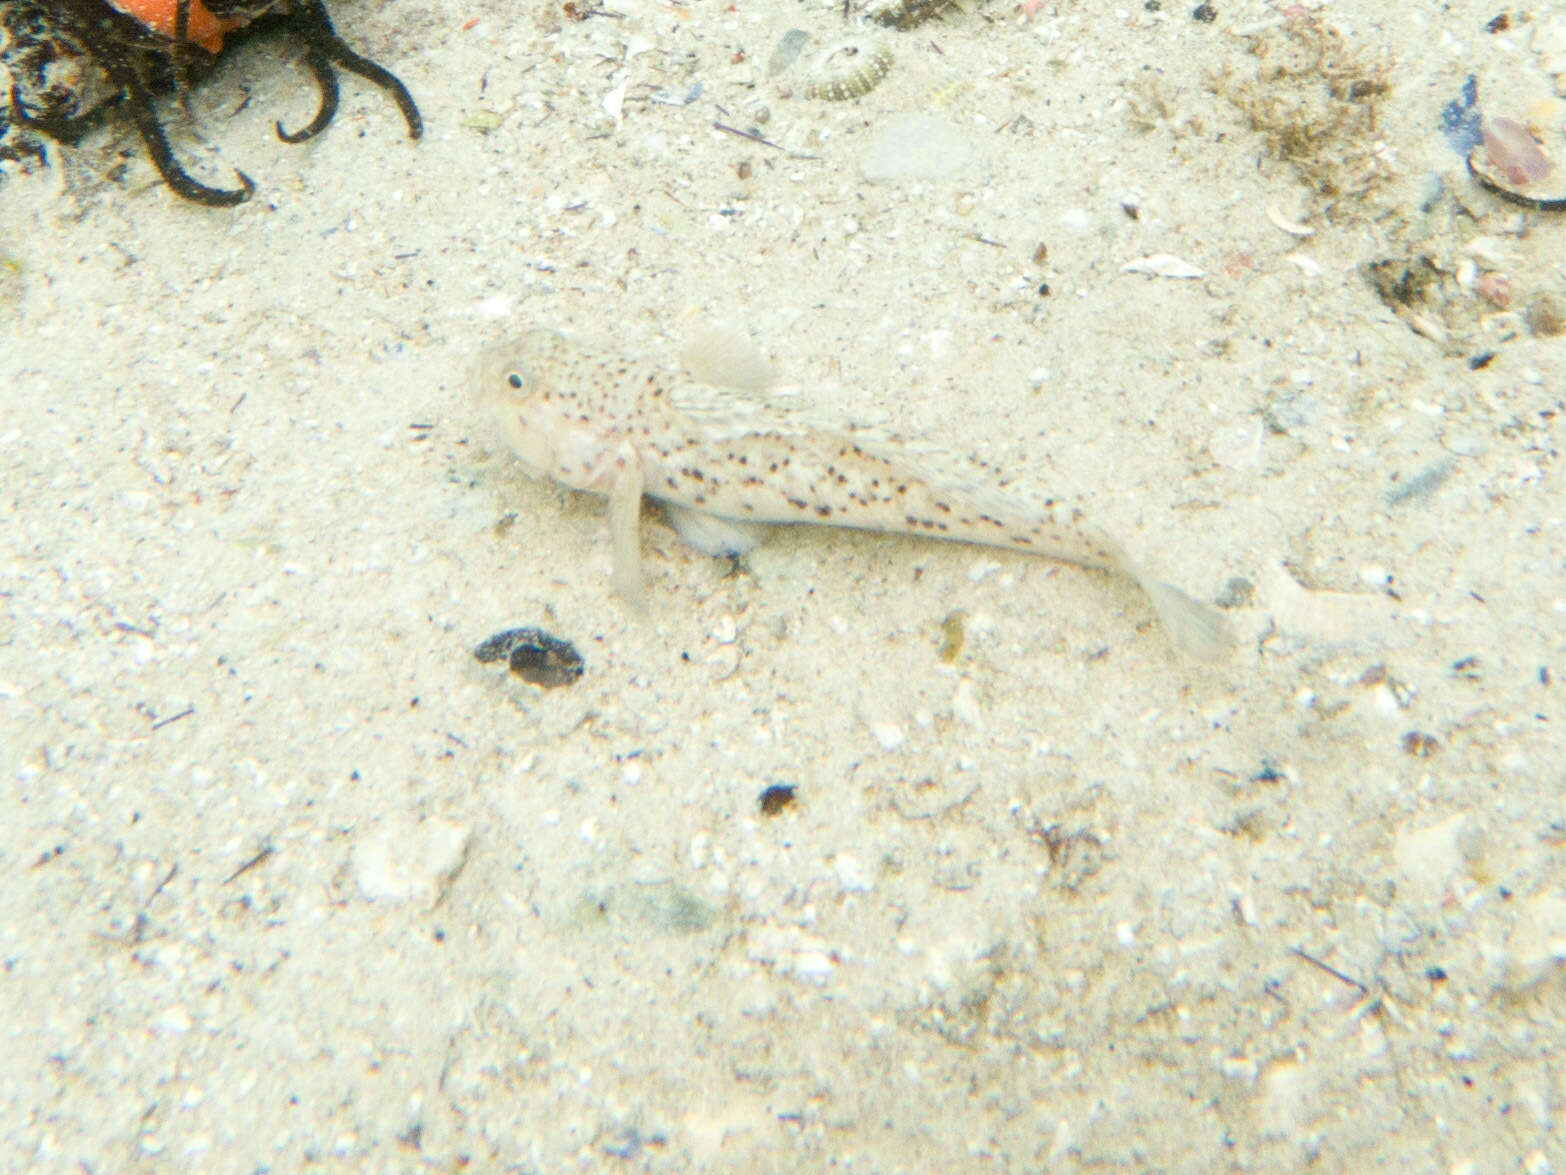 Image of Barehead goby